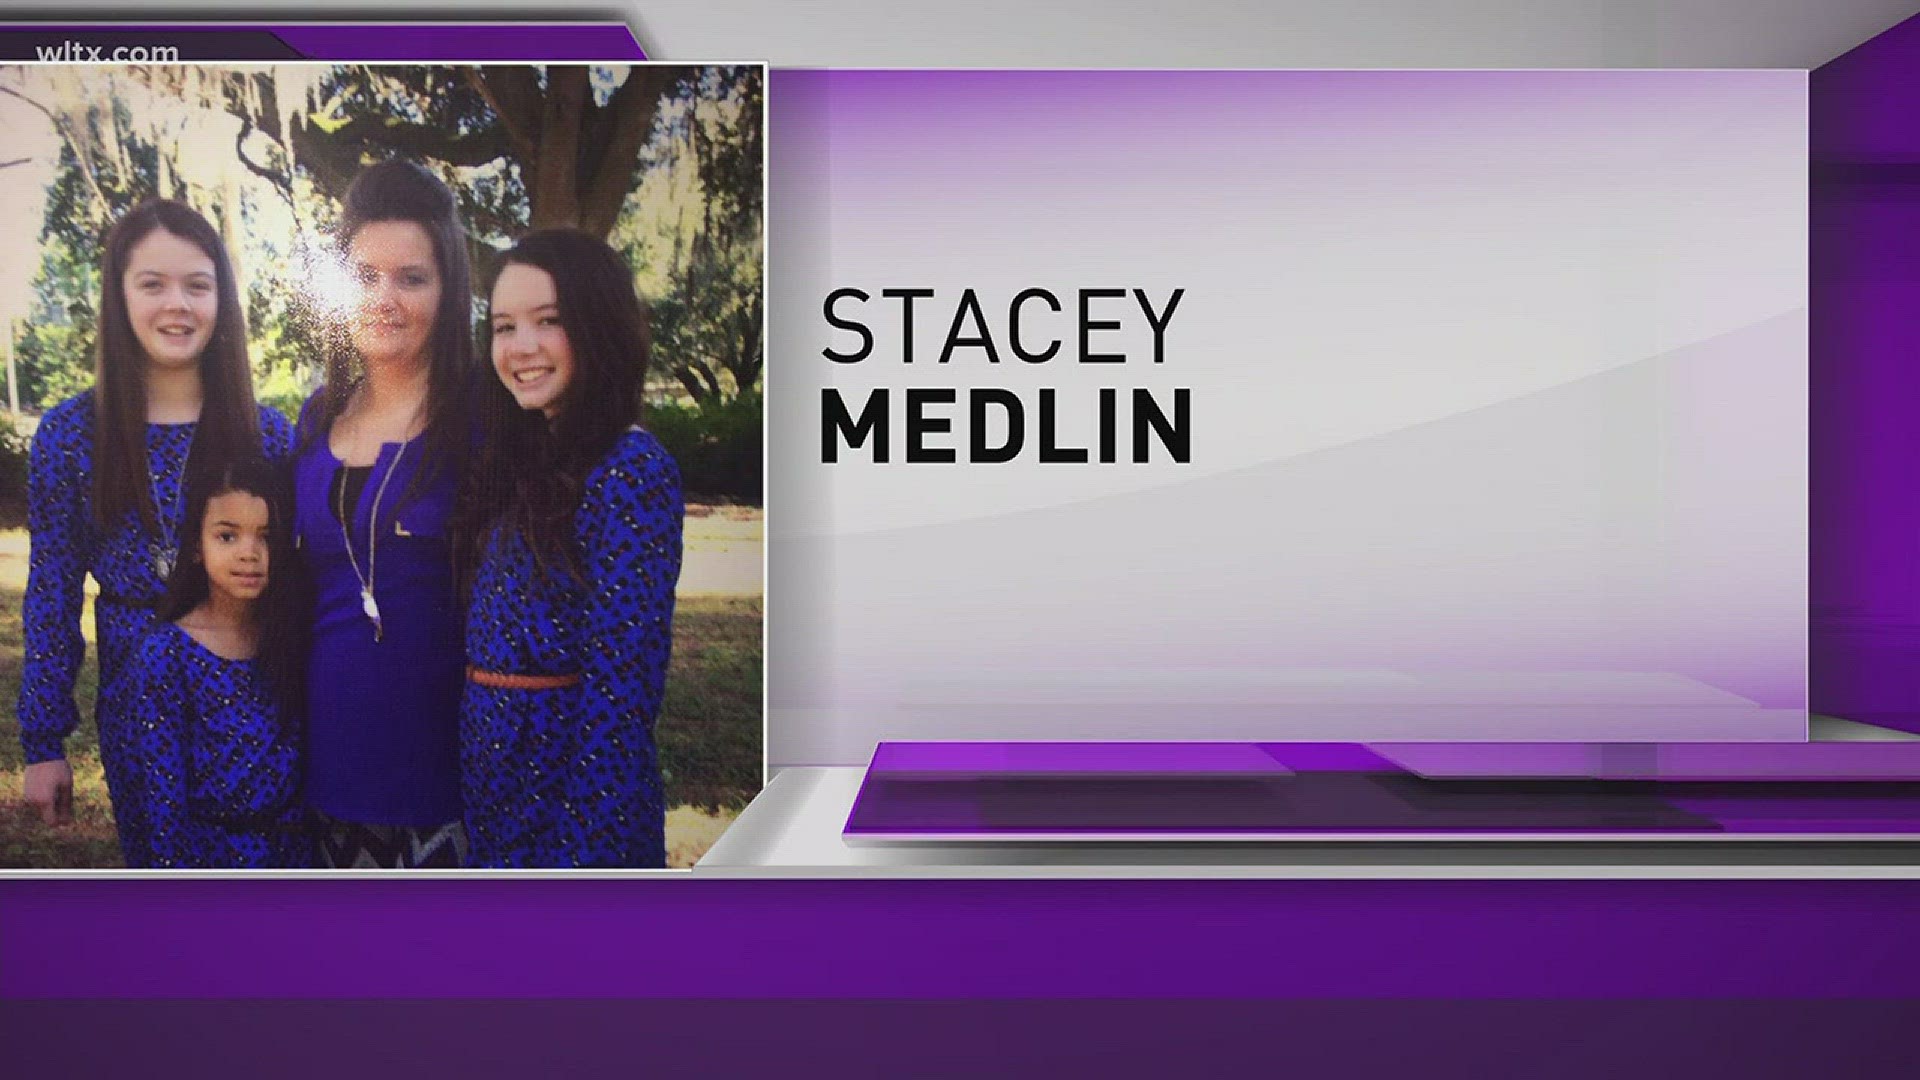 Congratulations to our Mom of the Day, Stacey Medlin! Stacey was nominated by her daughter, Ileyah.